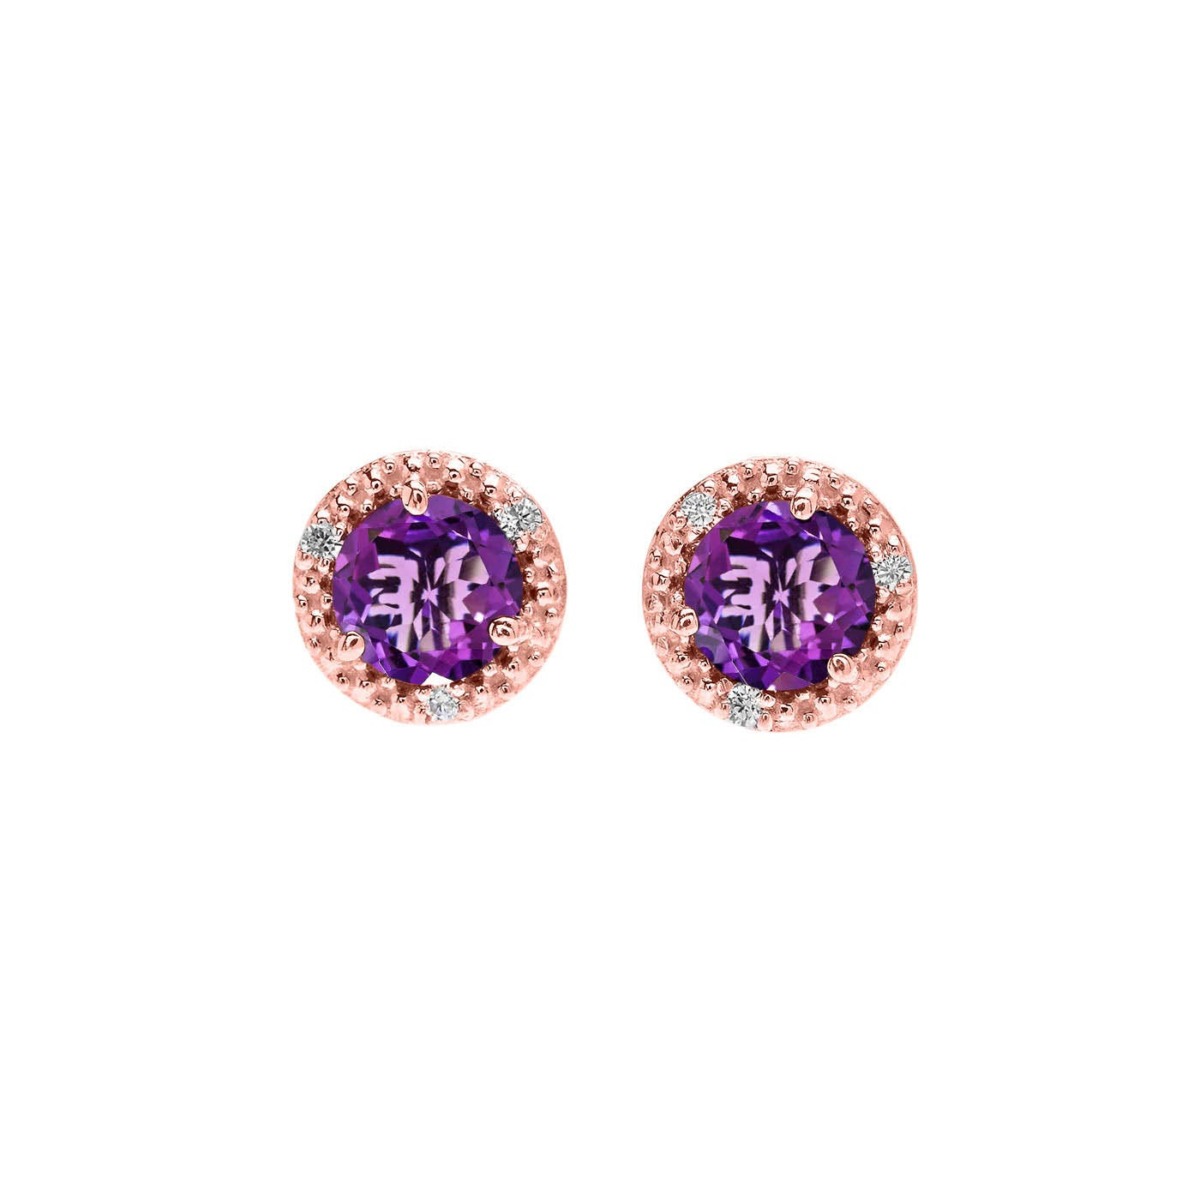 Earrings in Rose - Gold Boutique Man GOOFASH